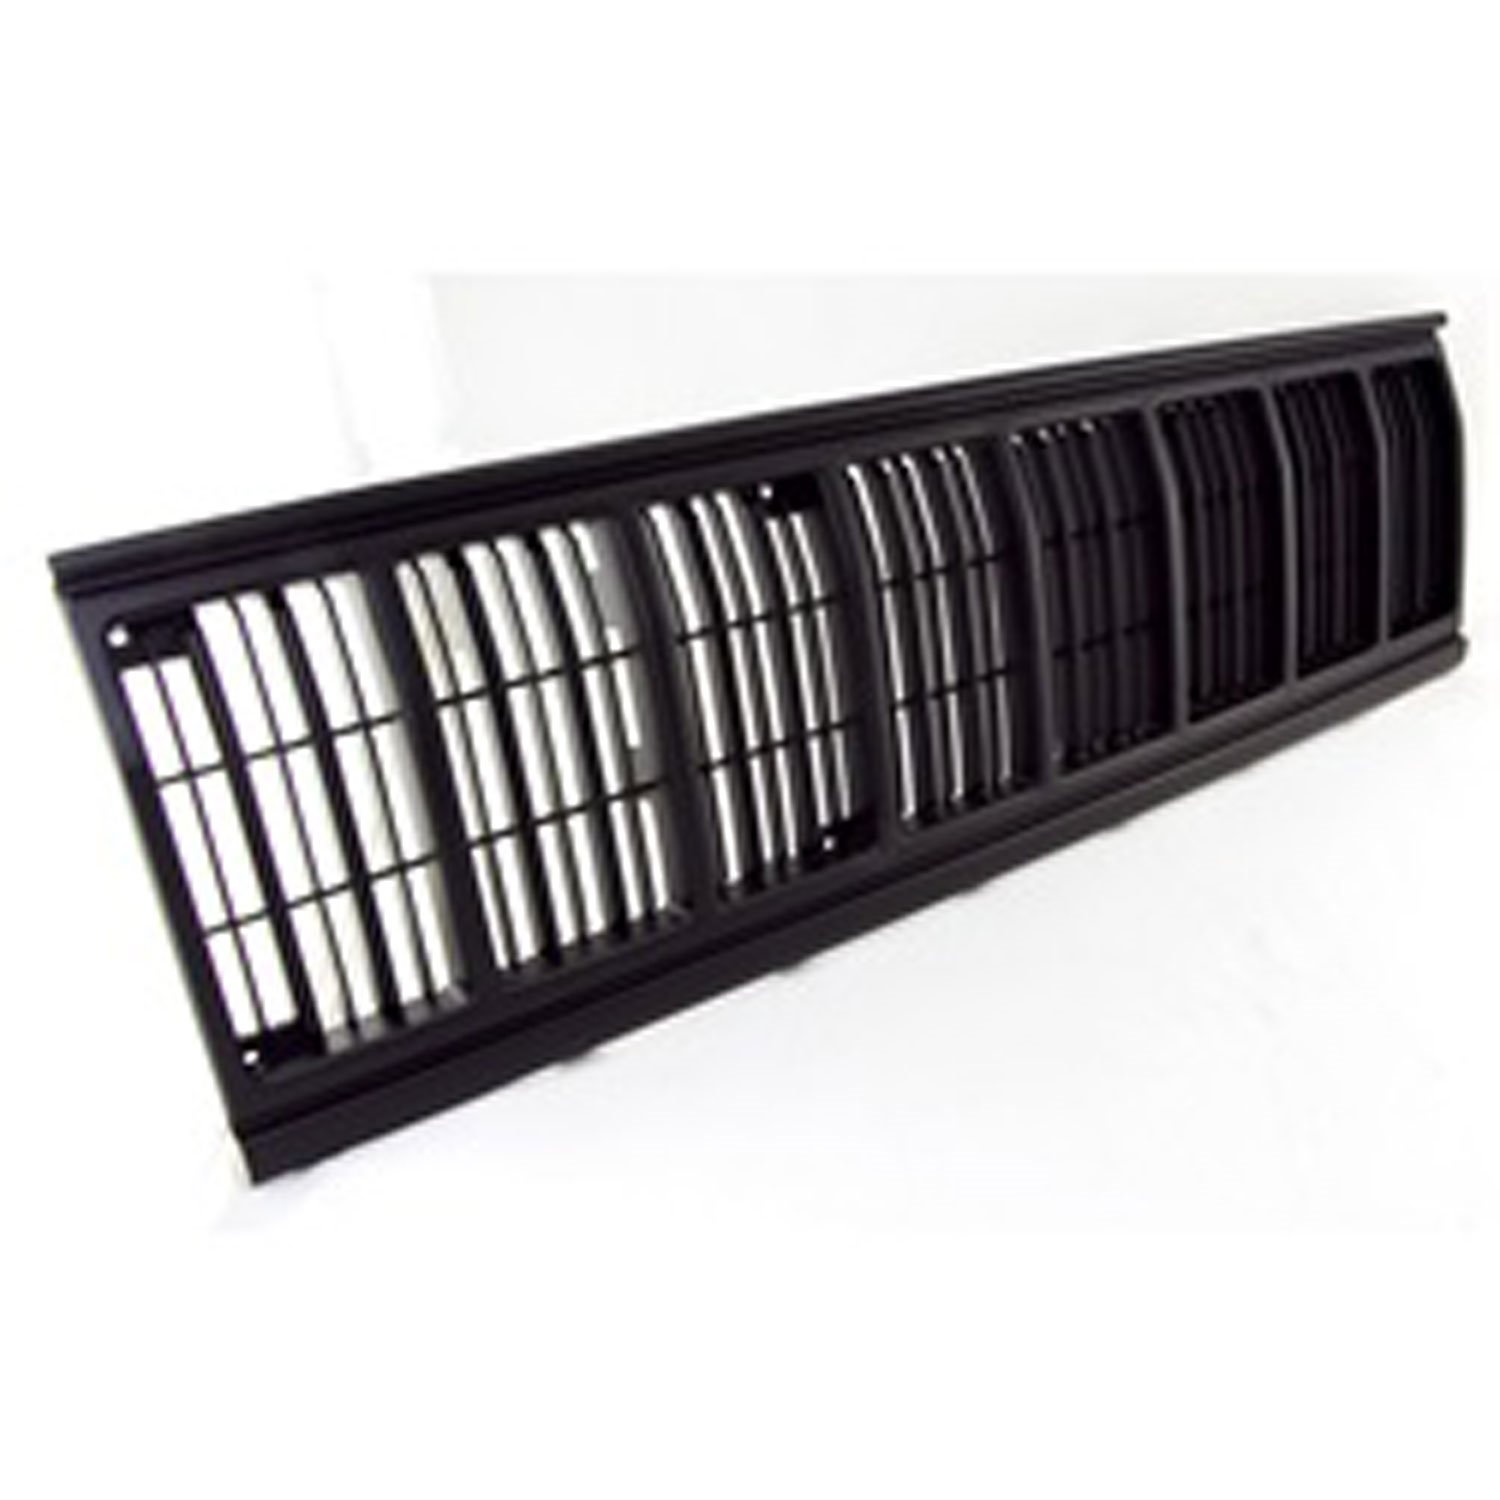 This black grille insert from Omix-ADA fits 91-92 Jeep Cherokee XJ.